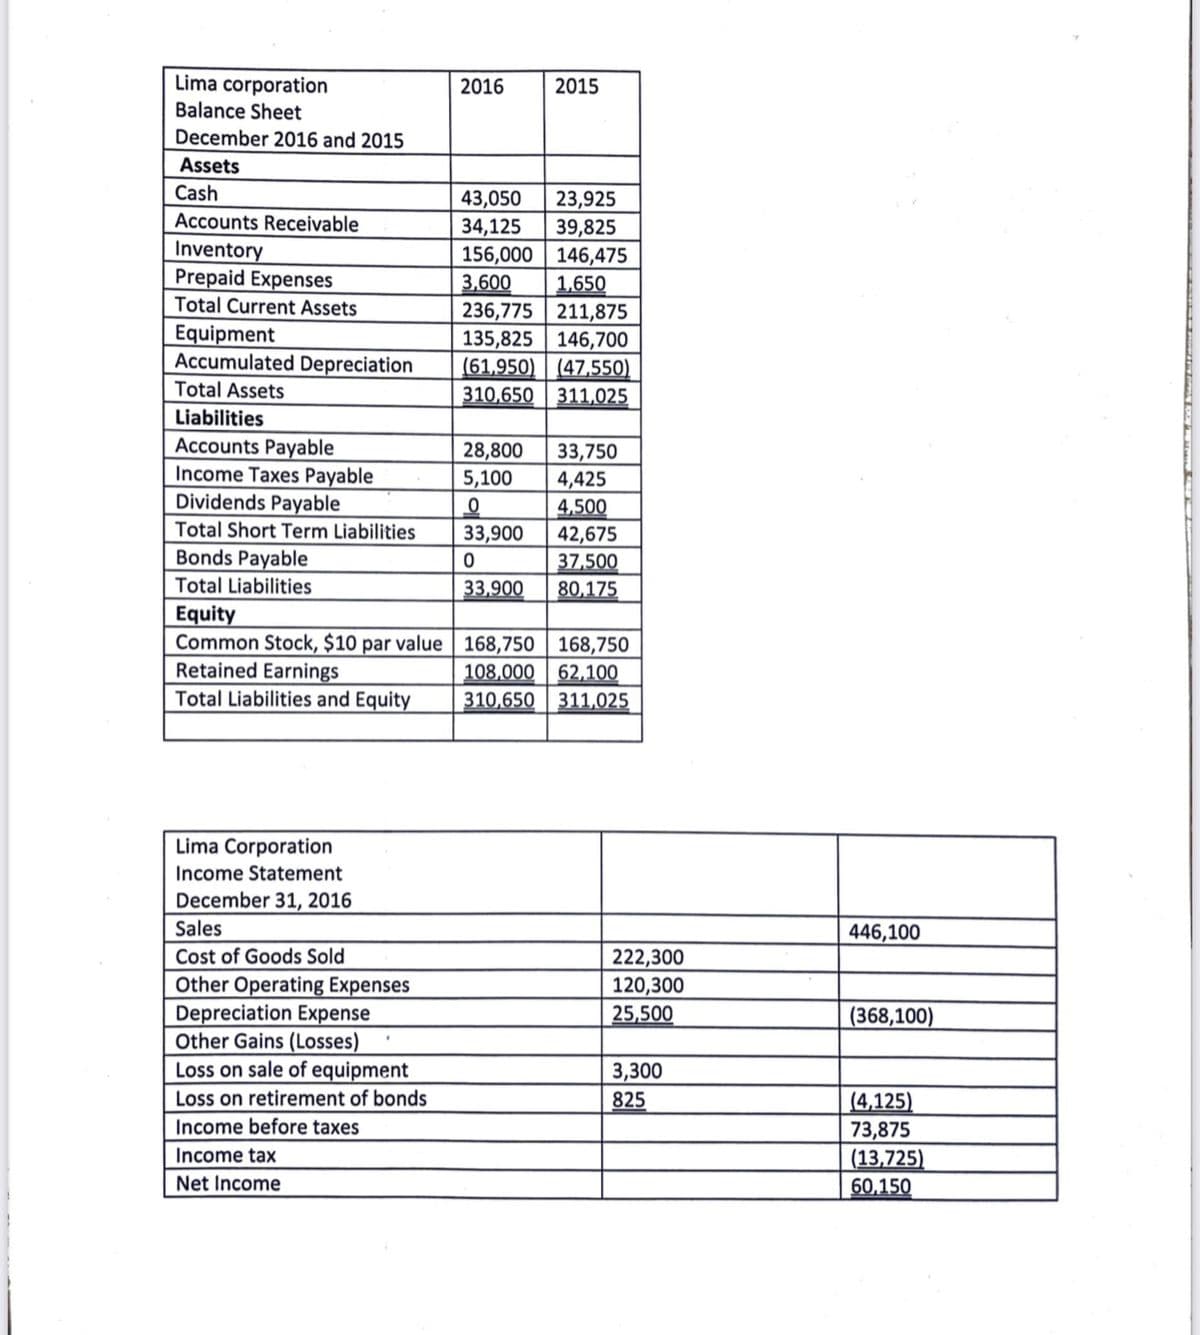 Lima corporation
Balance Sheet
2016
2015
December 2016 and 2015
Assets
Cash
43,050
23,925
Accounts Receivable
34,125
Inventory
Prepaid Expenses
Total Current Assets
39,825
156,000 146,475
3,600
1,650
236,775 211,875
135,825 146,700
(61,950) (47,550)
310,650 311,025
Equipment
Accumulated Depreciation
Total Assets
Liabilities
Accounts Payable
Income Taxes Payable
Dividends Payable
28,800
5,100
33,750
4,425
4,500
42,675
37,500
80,175
Total Short Term Liabilities
33,900
Bonds Payable
Total Liabilities
33,900
Equity
Common Stock, $10 par value | 168,750 | 168,750
Retained Earnings
Total Liabilities and Equity
108,000
62,100
310,650 311,025
Lima Corporation
Income Statement
December 31, 2016
Sales
446,100
Cost of Goods Sold
Other Operating Expenses
Depreciation Expense
Other Gains (Losses)
Loss on sale of equipment
222,300
120,300
25,500
(368,100)
3,300
Loss on retirement of bonds
825
(4,125)
73,875
(13,725)
60,150
Income before taxes
Income tax
Net Income
